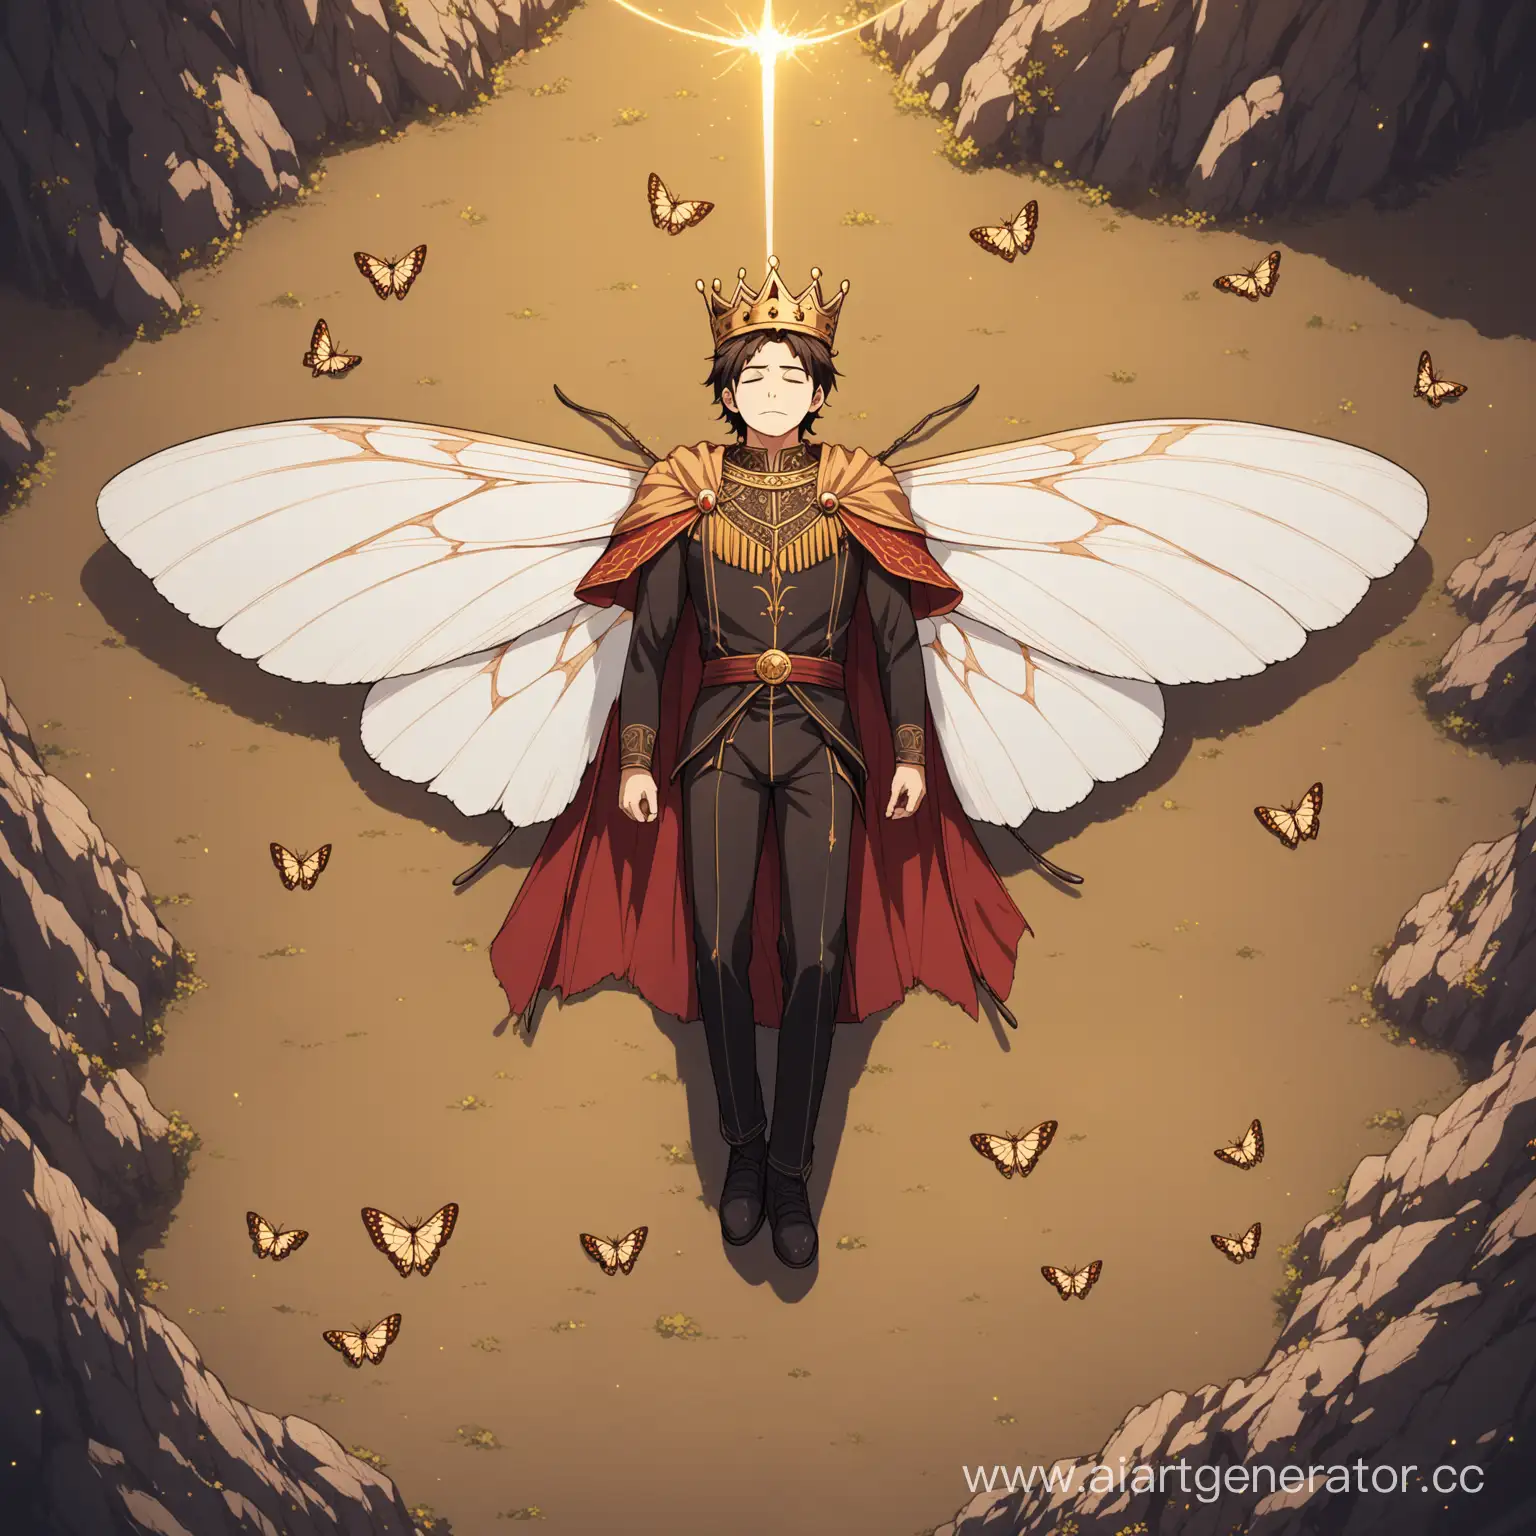 Before us is the tyrant king of moths, David Tsets the Second. He is Armenian. He is defeated by the heroes and lies defeated on the mountain ground. He has tattered moth wings behind his back, and one antenna sticks out of his head. A crown is lying next to him, his eyes are closed. He's lying down, top view. Anime style